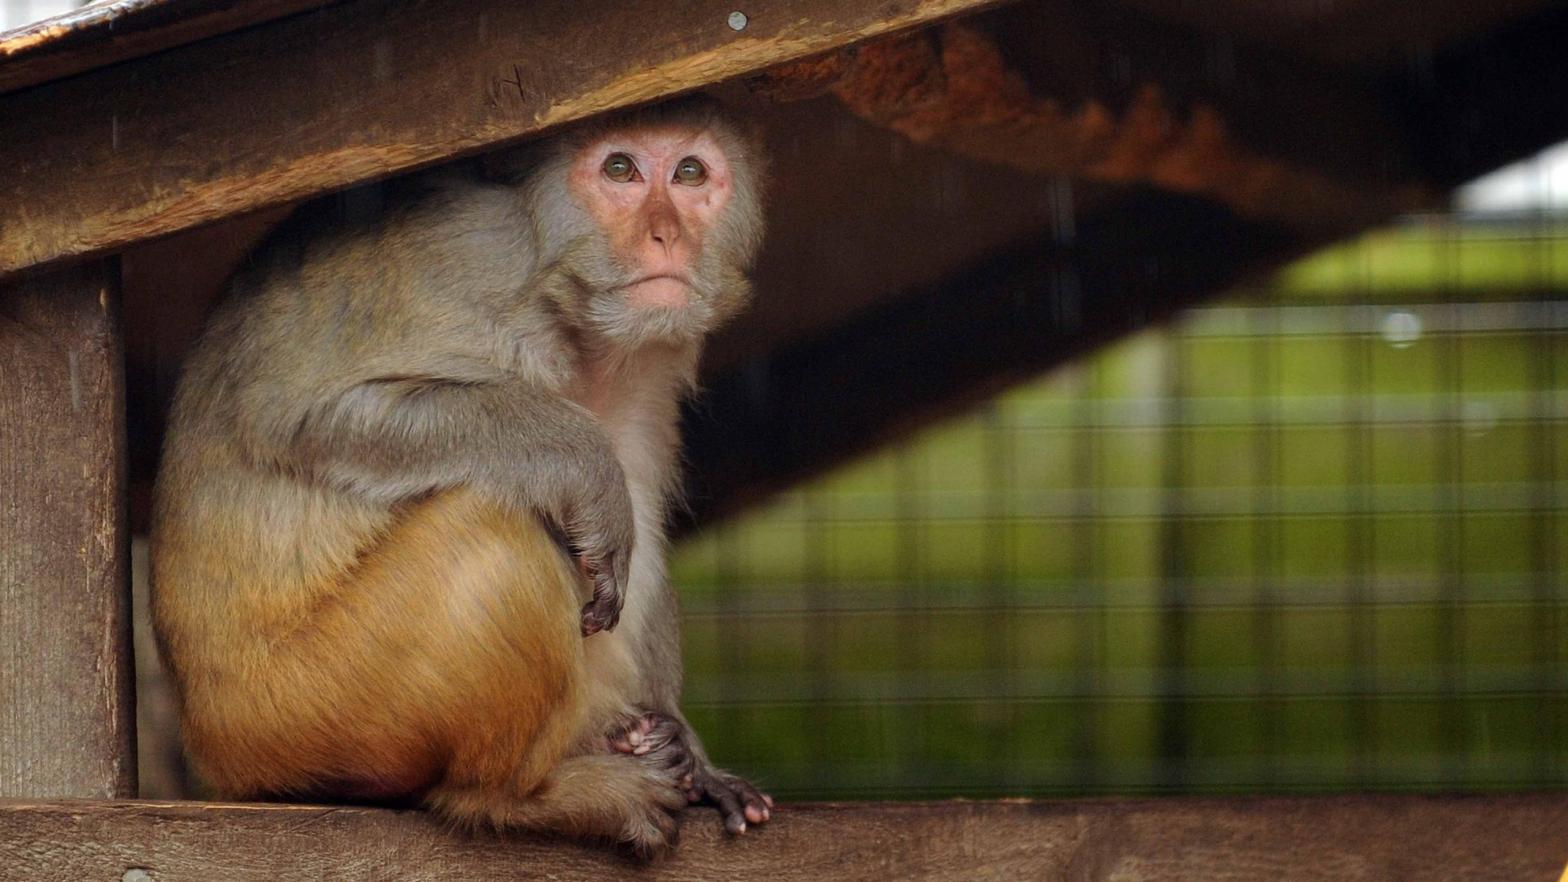 A Rhesus Monkey takes shelter in his enclosure as rain begins to fall, at the Drayton Park Manor zoo, August 28, 2011. (Photo: NTI., Getty Images)